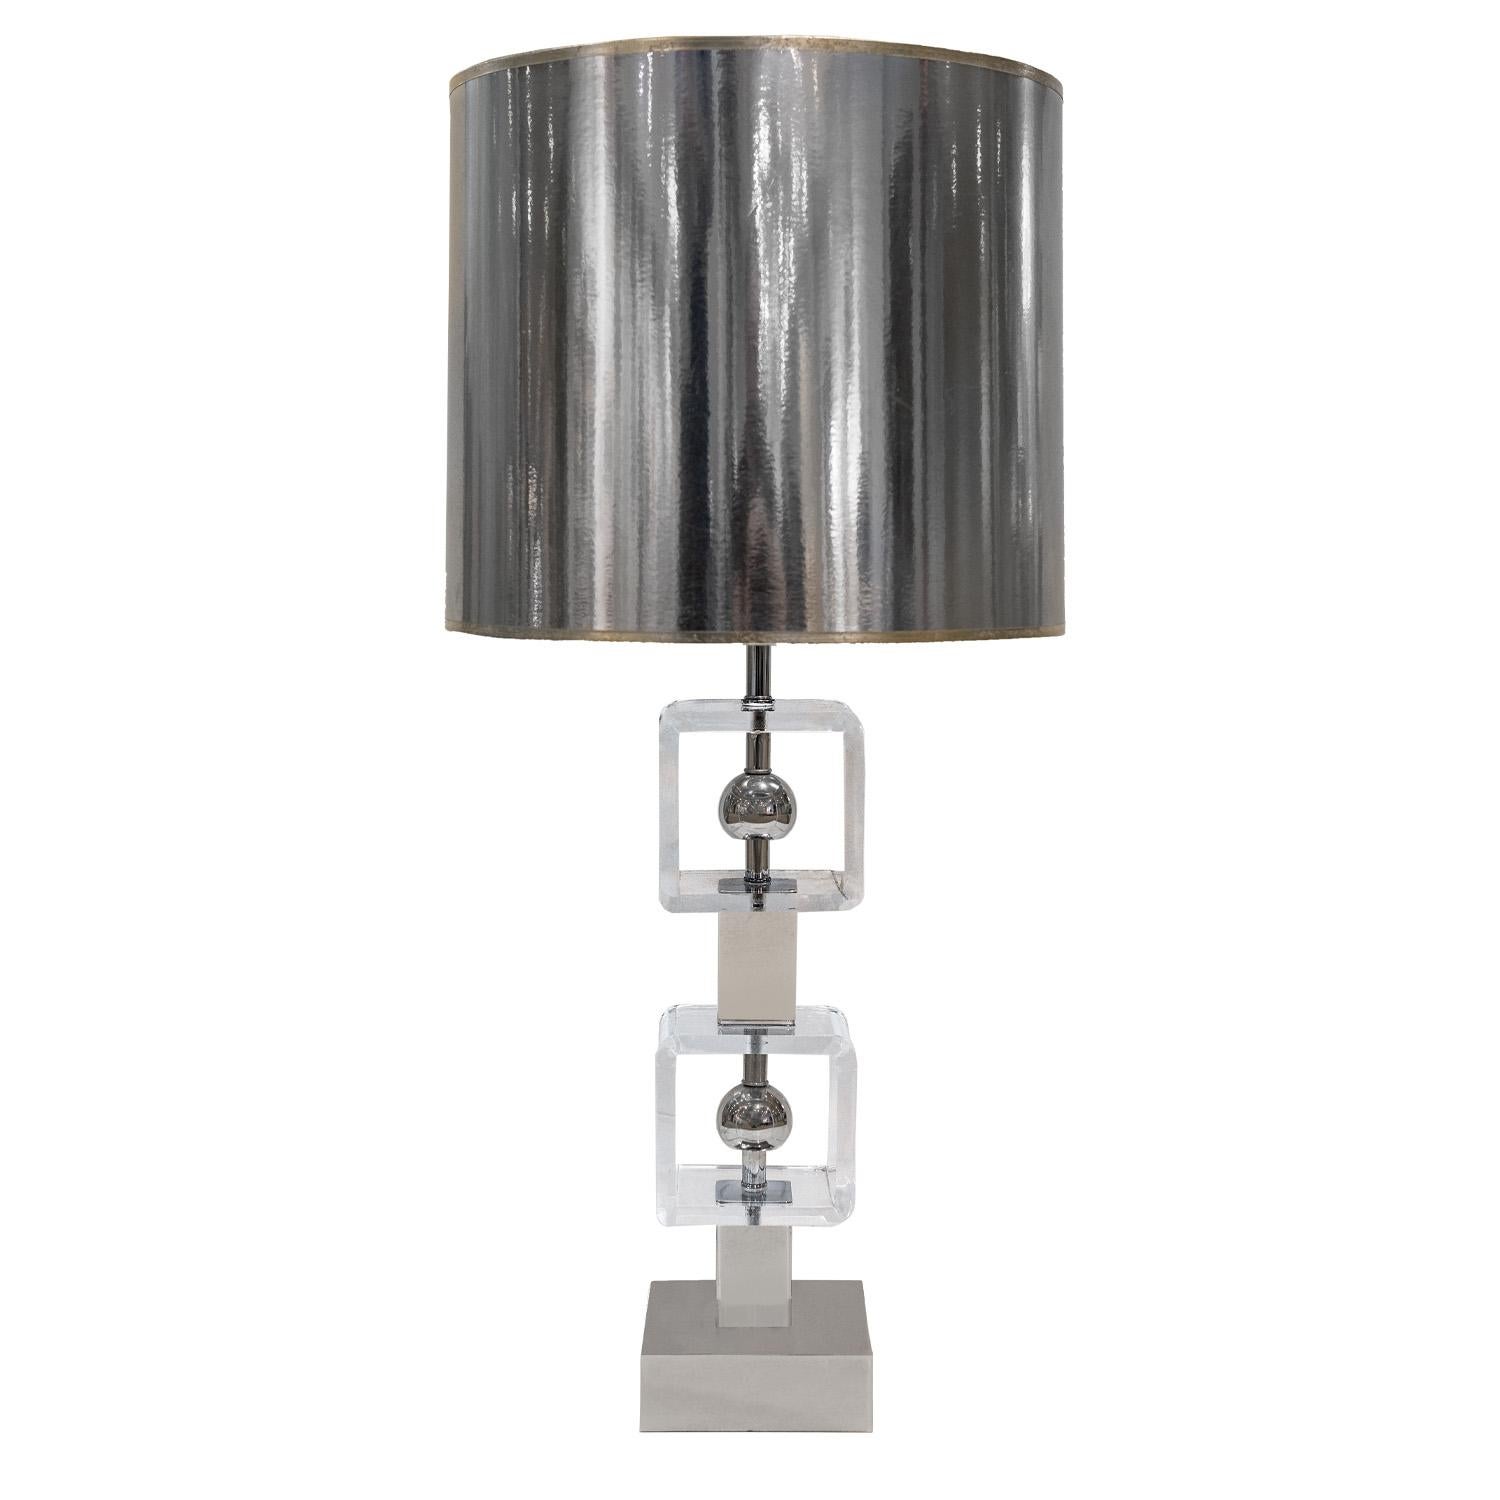 Sculptural table lamp in lucite with polished chrome spheres and base with original silver paper shade, American 1970's. This lamp is very chic.

W: 6 inches
D: 6 inches
Shade Diam: 15 inches
H: 35.5 inches 